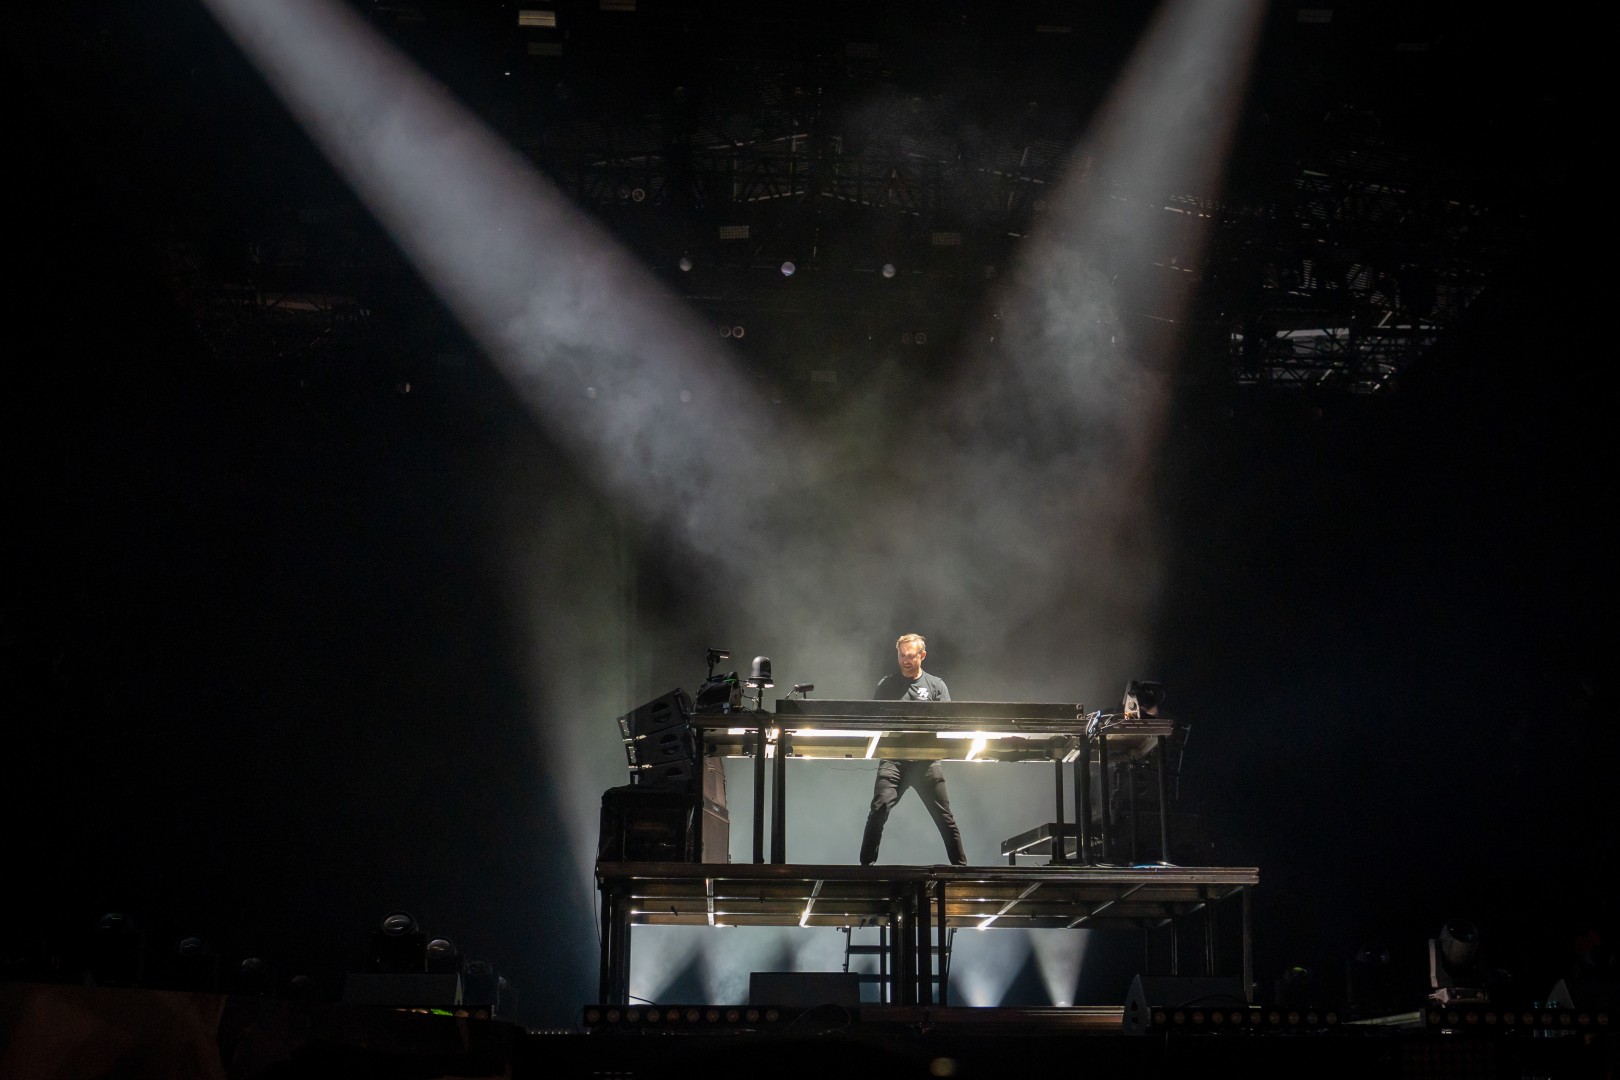 David Guetta at Cluj Arena in Cluj-Napoca on August 7, 2022 (310c70f484)